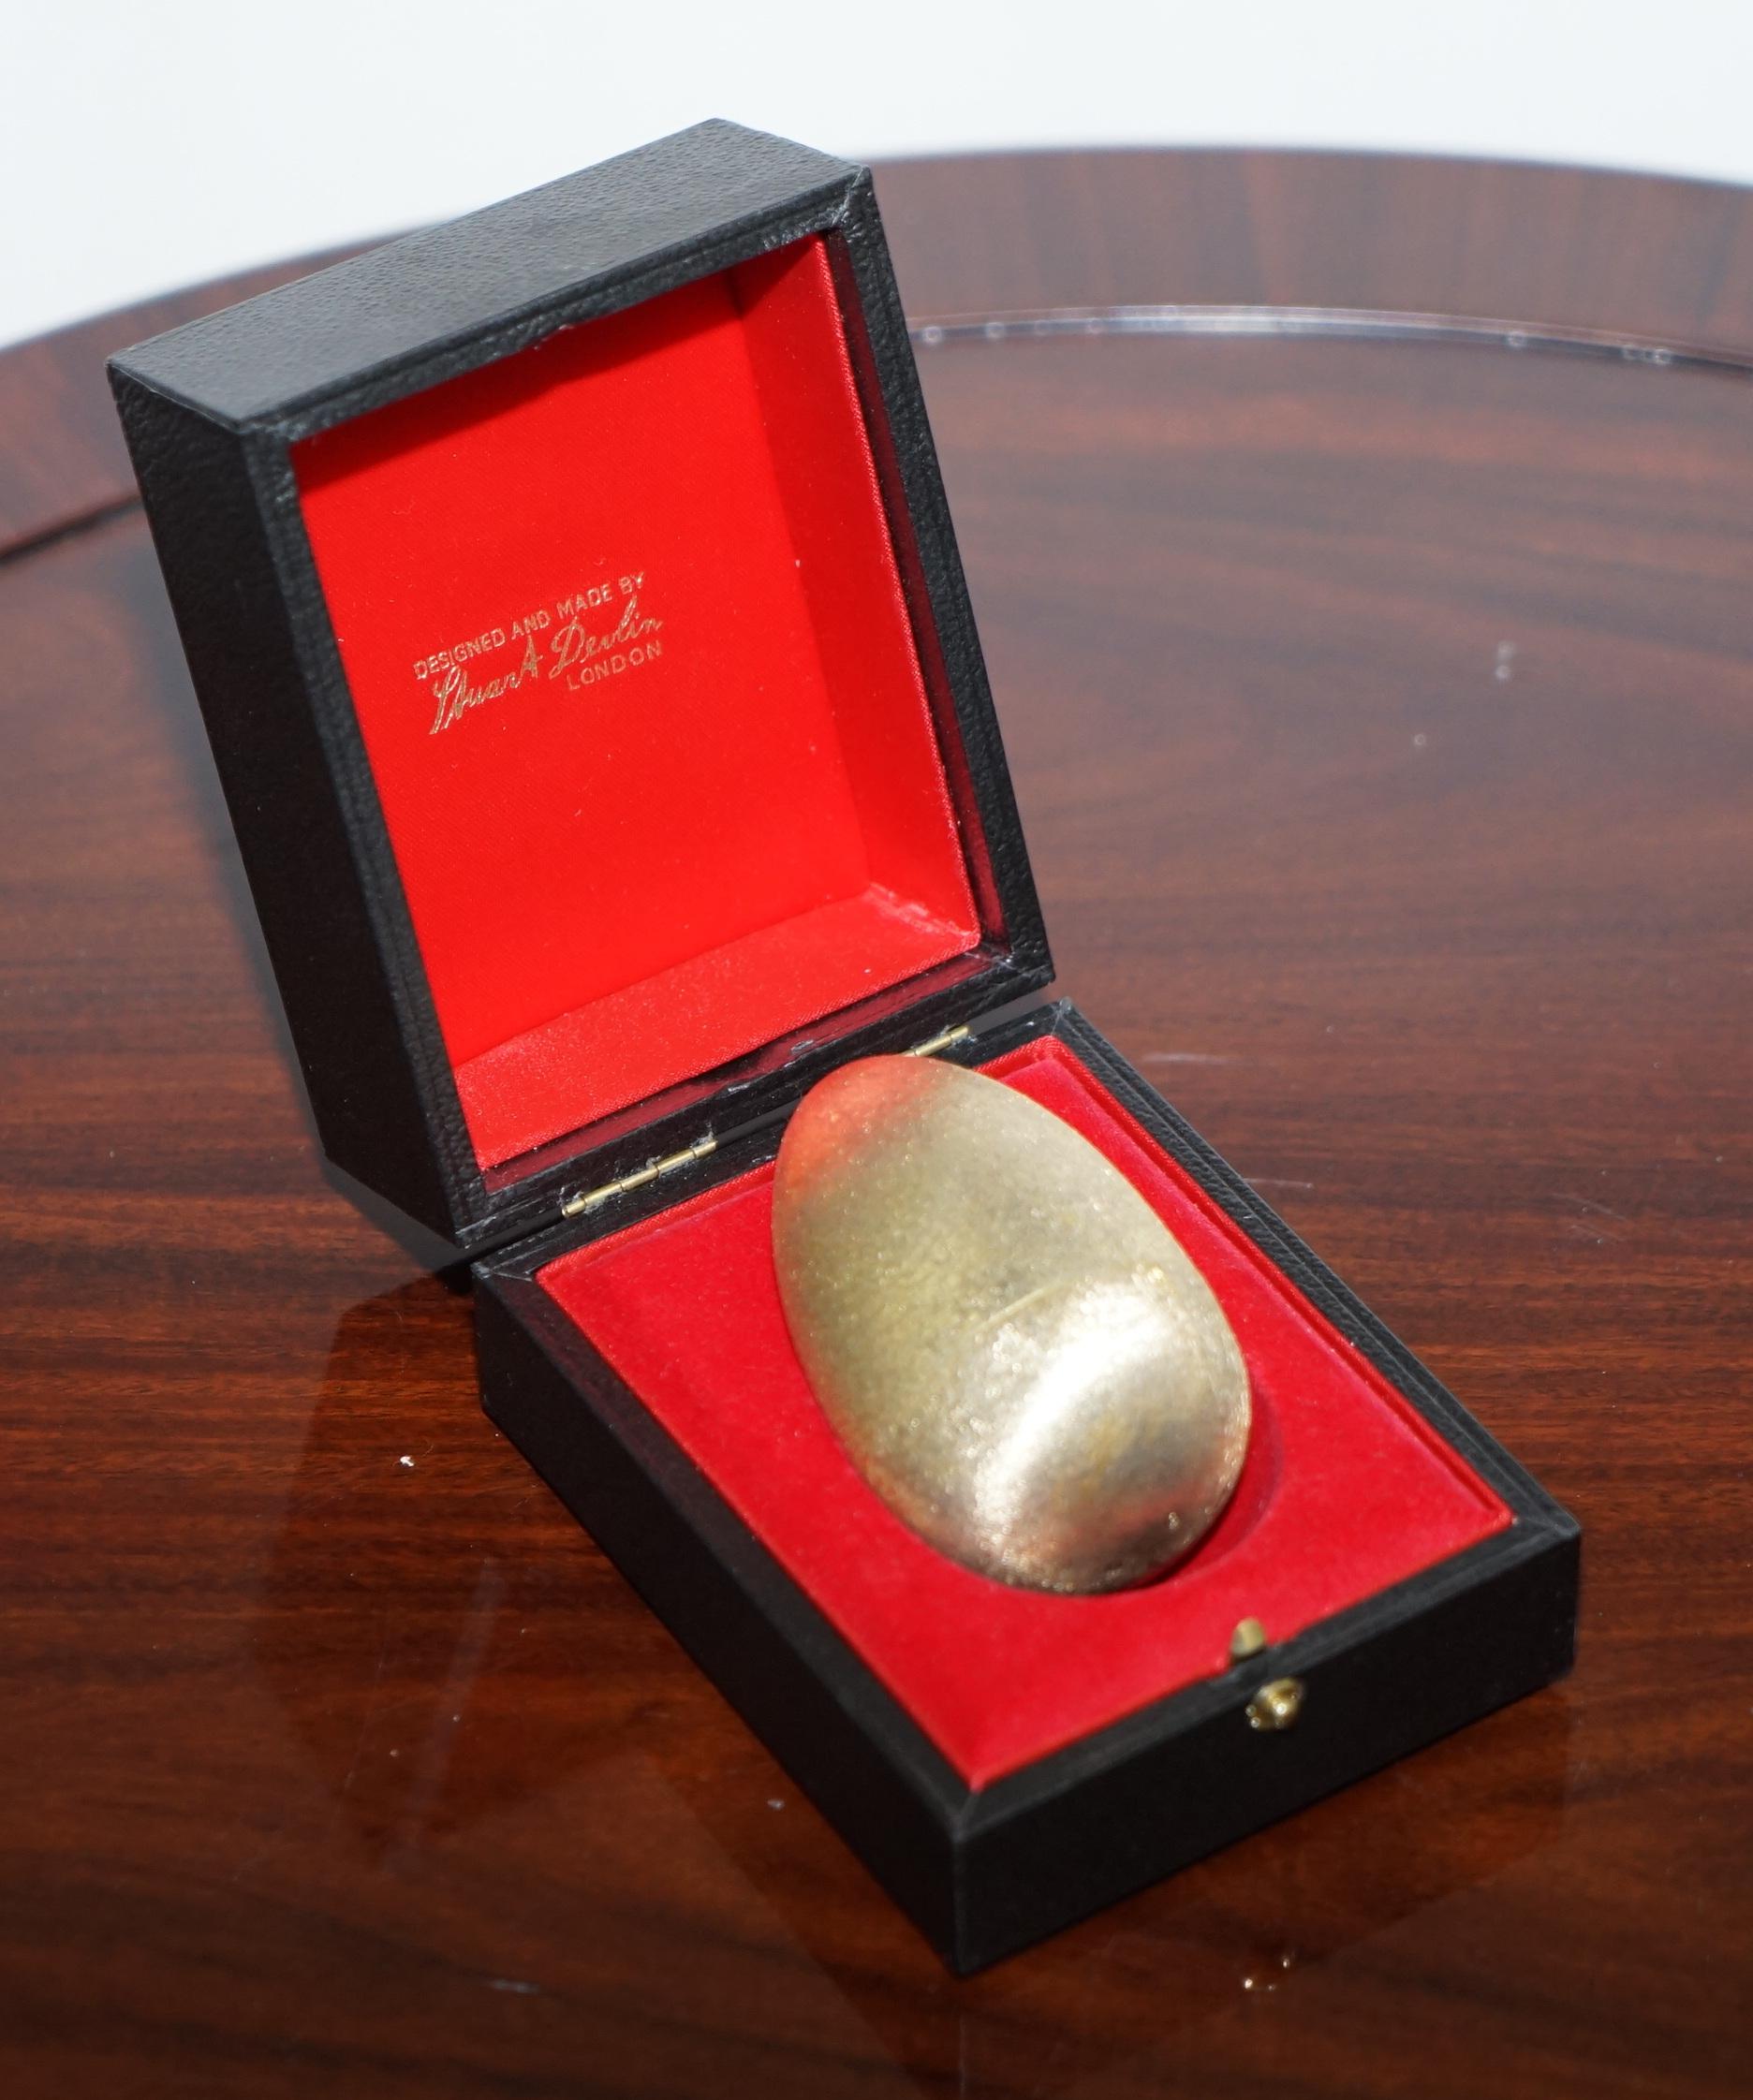 Wimbledon-Furniture

Wimbledon-Furniture is delighted to offer for sale this very rare and highly collectable Stuart Devlin Surprise egg made for the Queens Silver Jubilee in 1977

The piece is gold gilt sterling silver, fully hallmarked to the